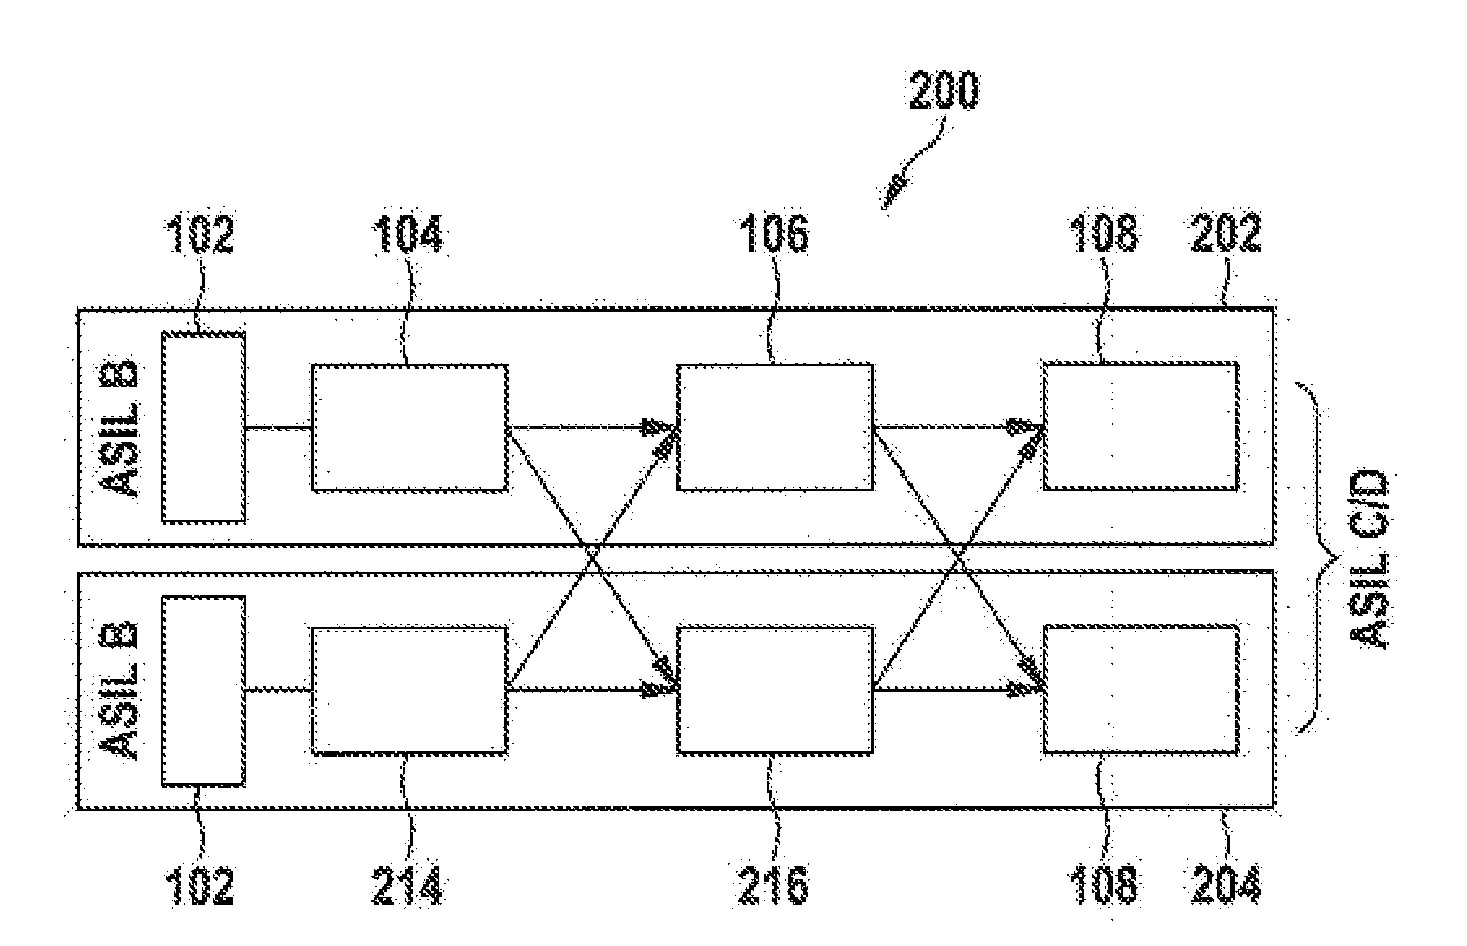 Security architecture, battery and motor vehicle having a corresponding battery